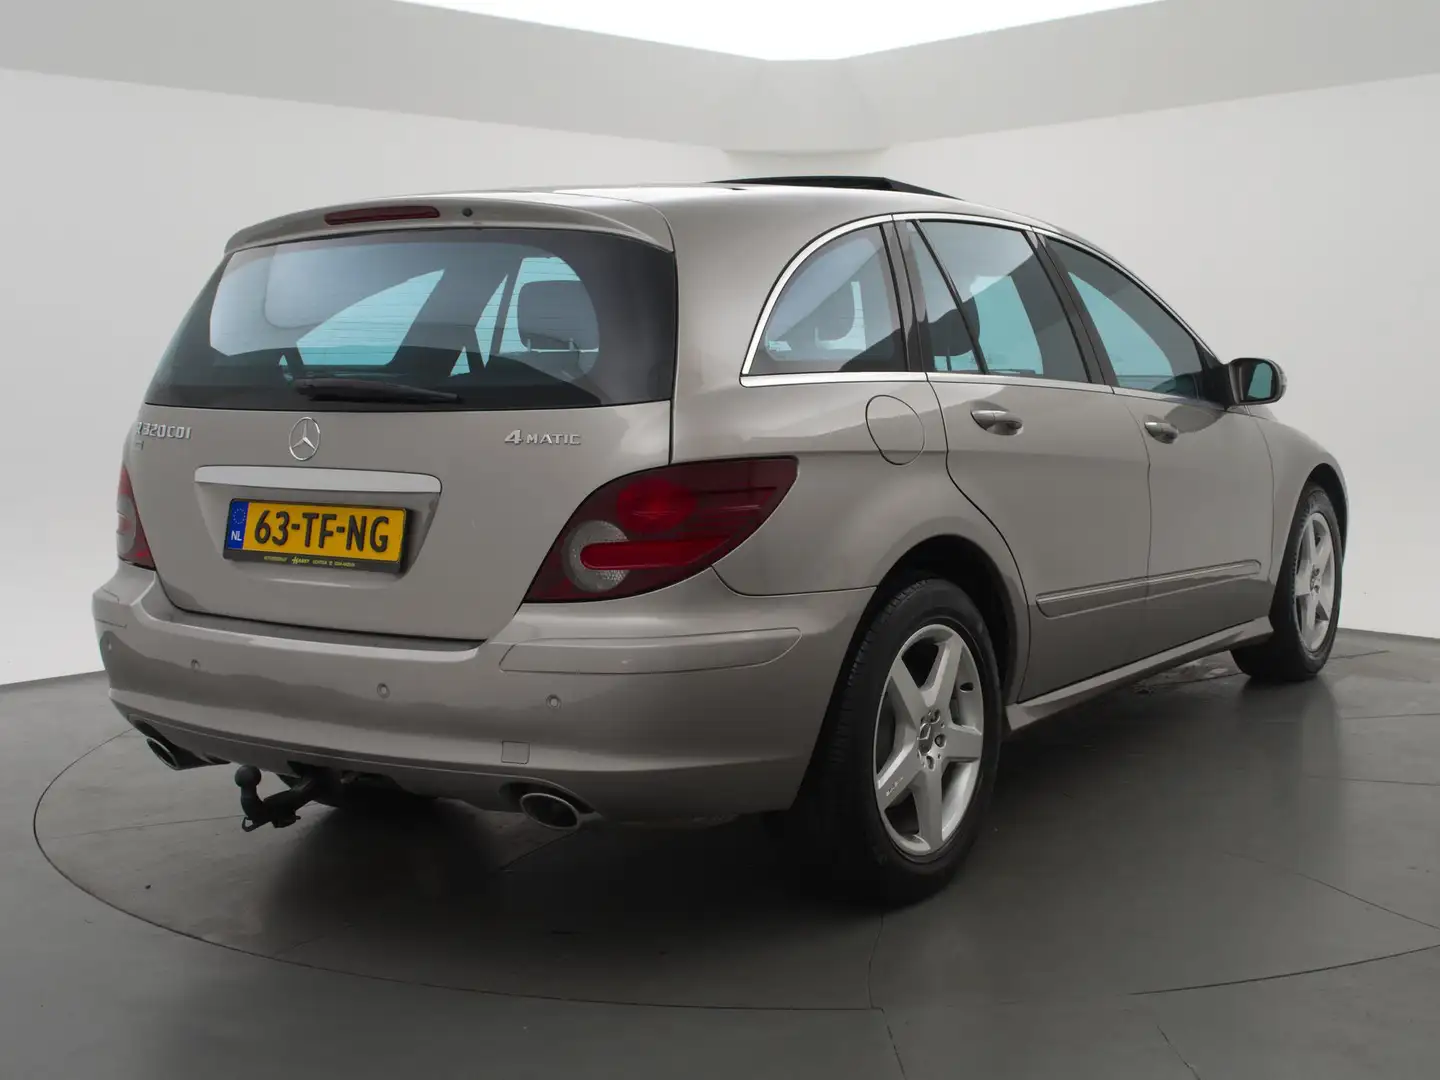 Mercedes-Benz R 320 CDI 4-MATIC 6-PERS. *184.762 KM* YOUNGTIMER Gris - 2